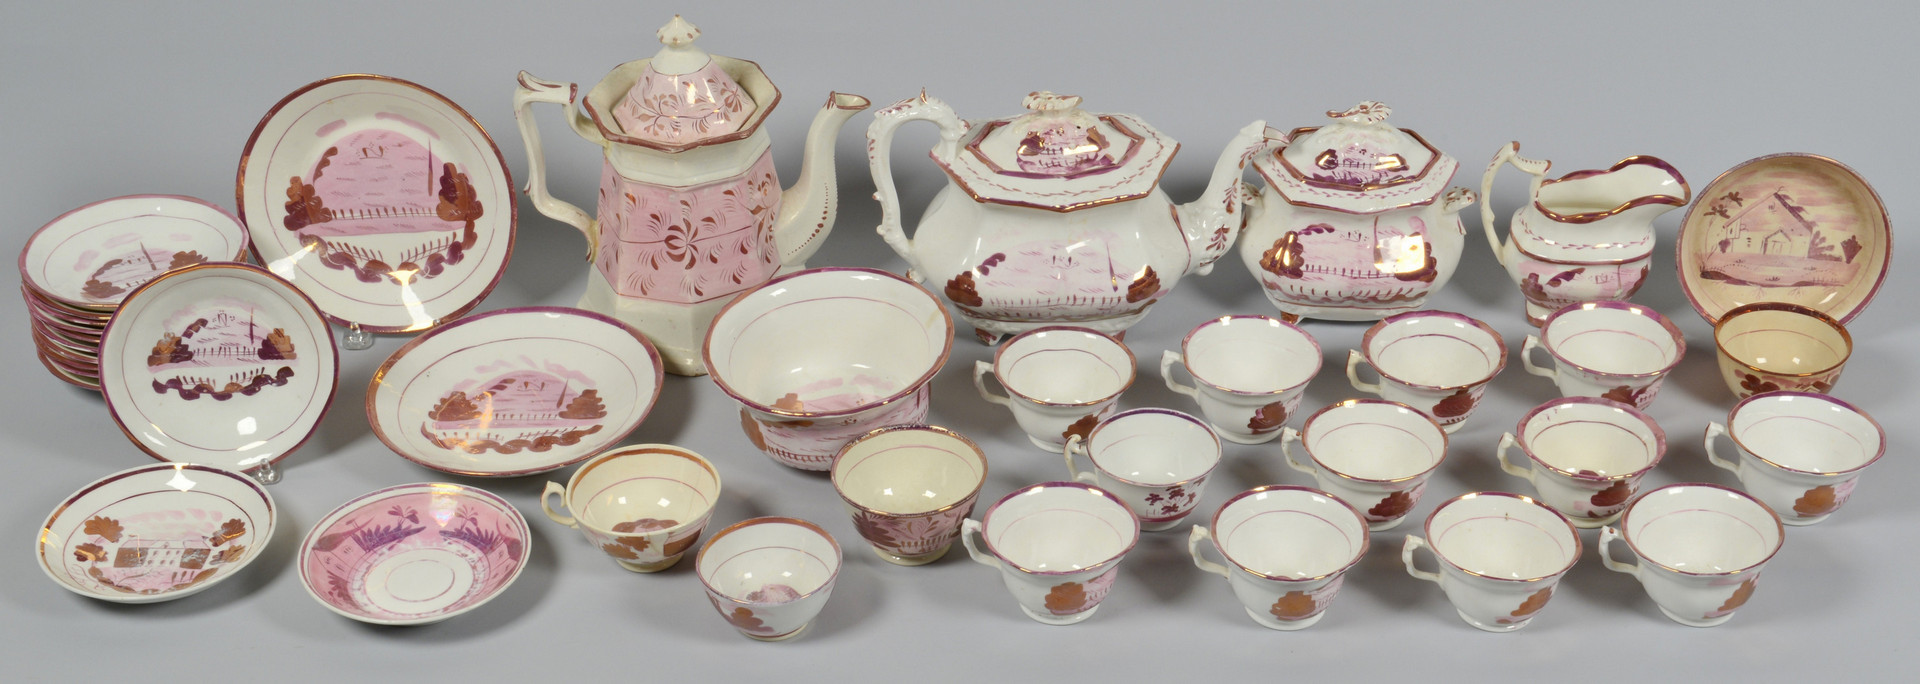 Lot 888: Assembled Grouping of Pink Lustre, 37 pcs.